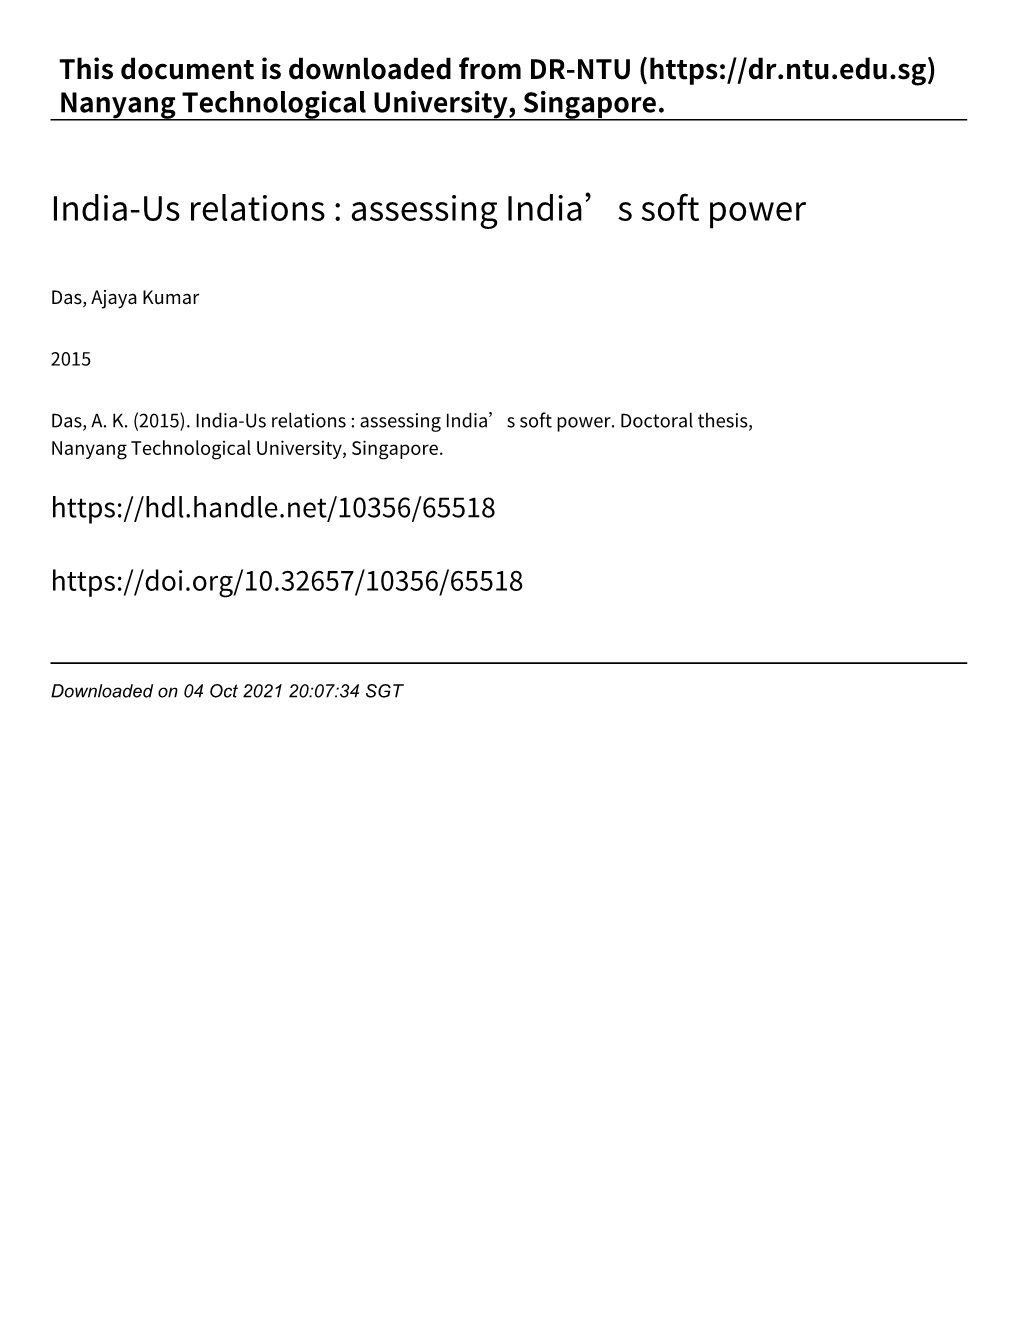 Assessing India's Soft Power